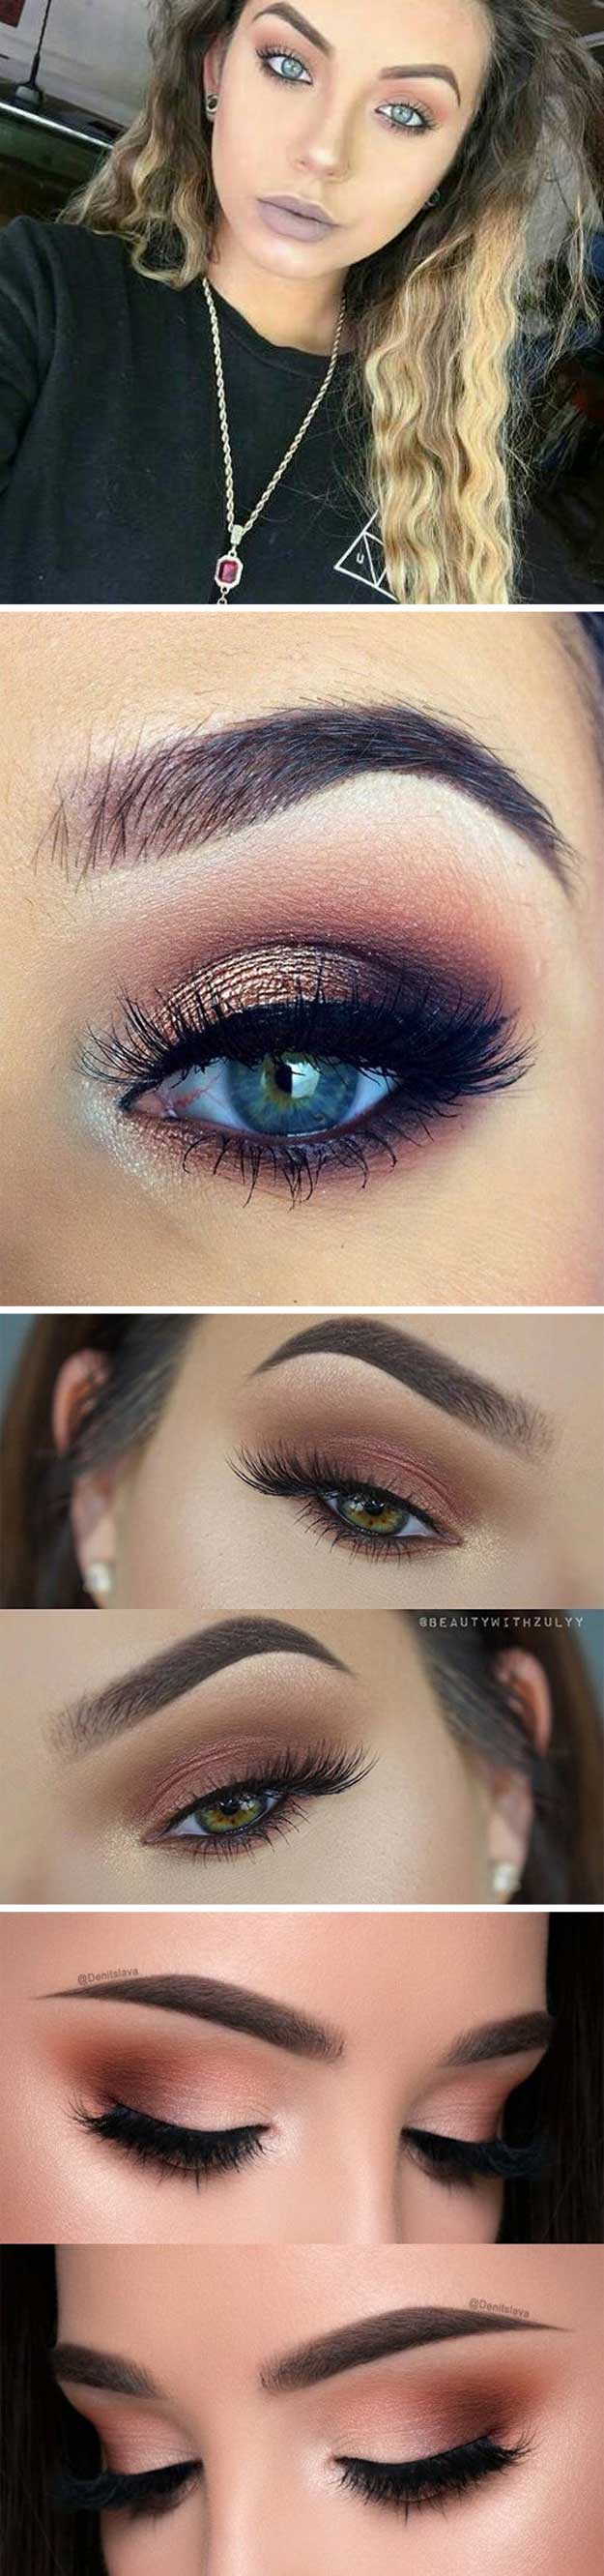 Cute Simple Makeup Ideas For Blue Eyes 35 Wedding Makeup For Blue Eyes The Goddess